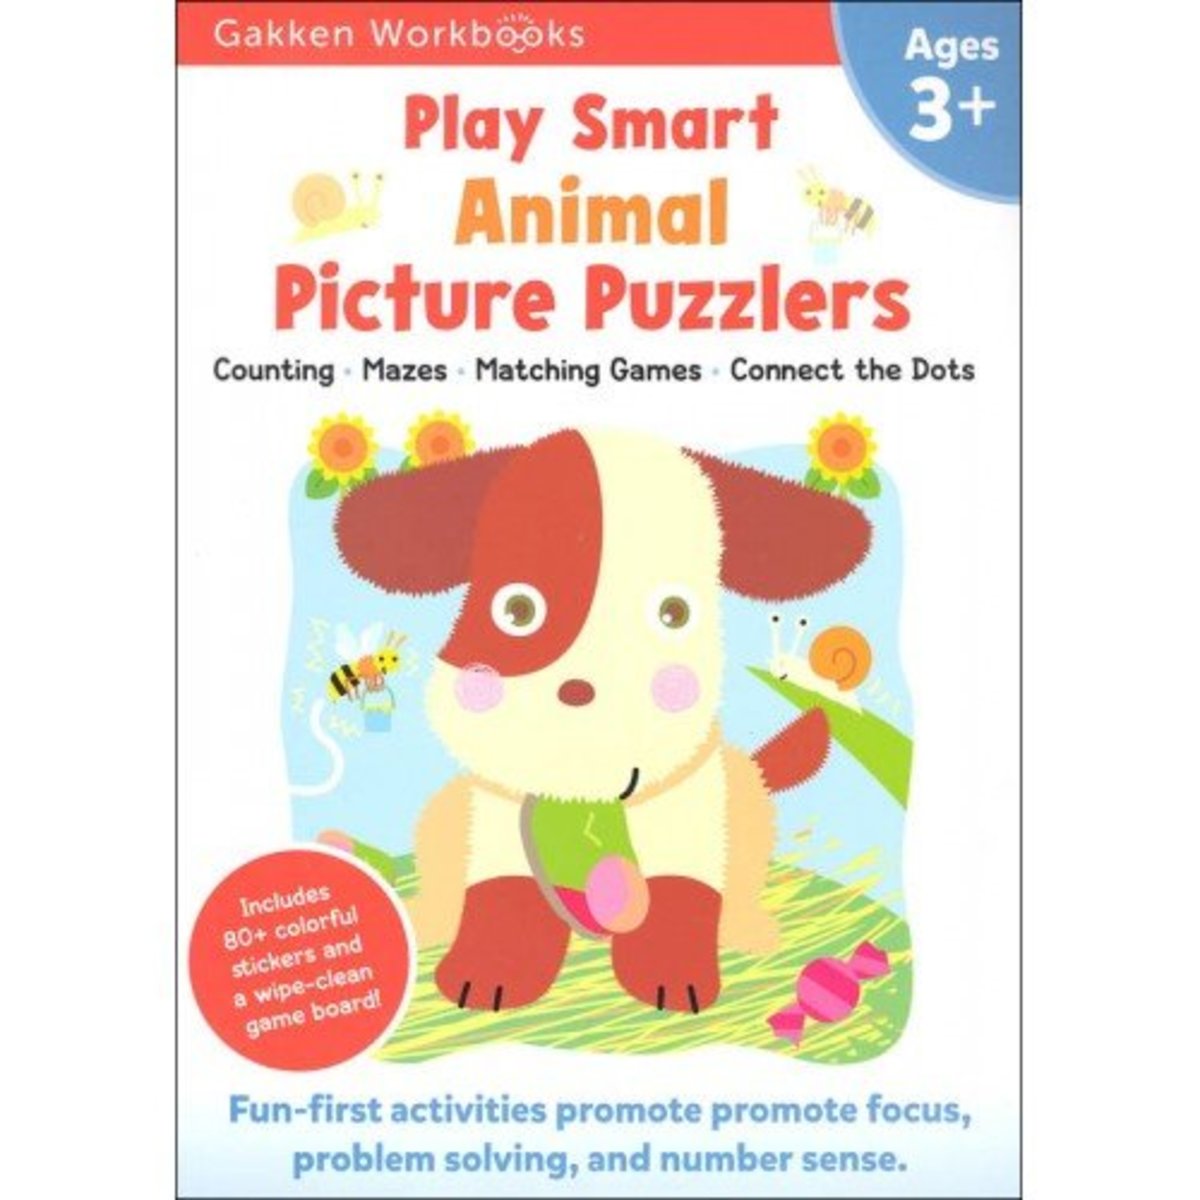 Gakken Play Smart Animal Picture Puzzlers 3+ 學研練習冊 動物拼圖 3歲+